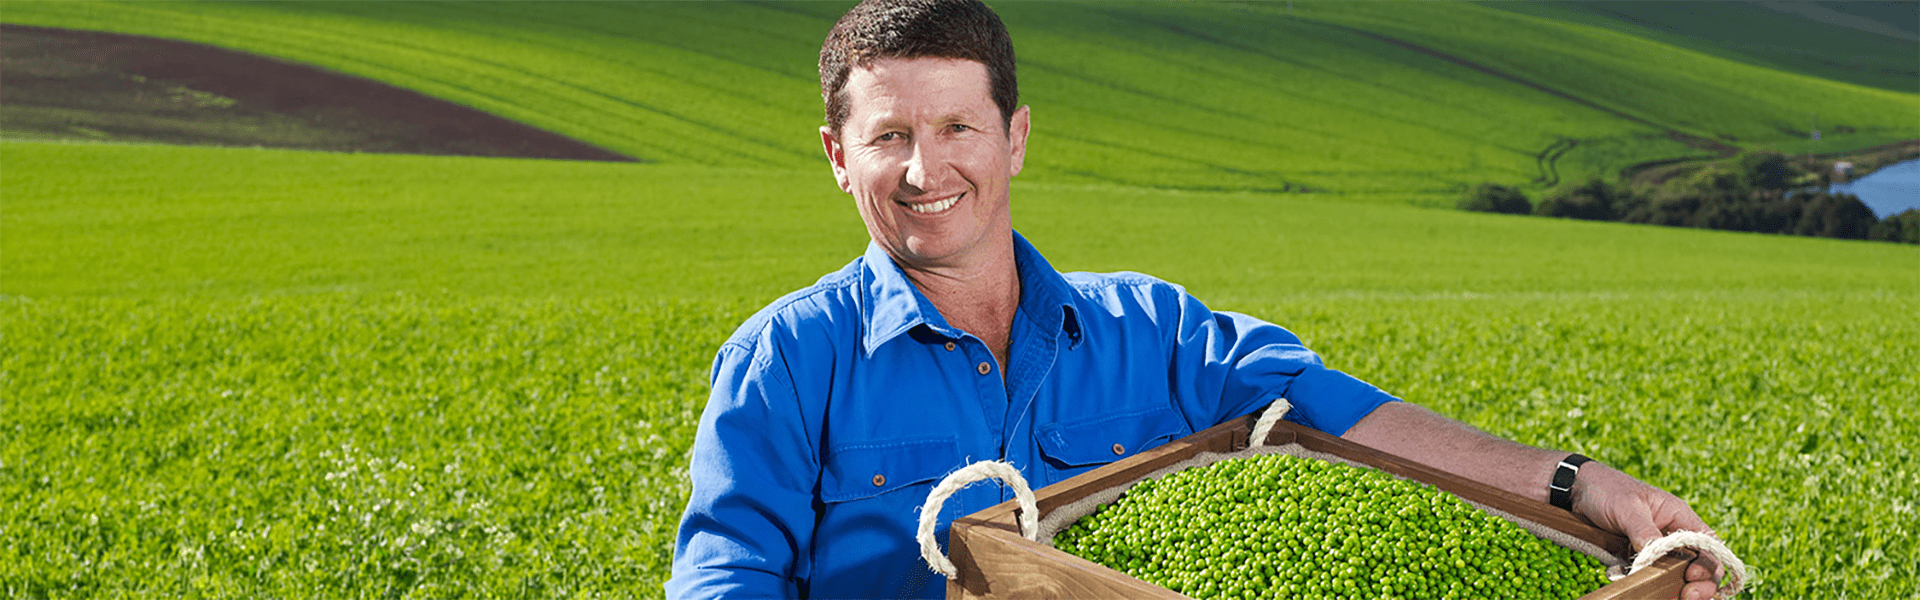 Man in field holding a basket of peas